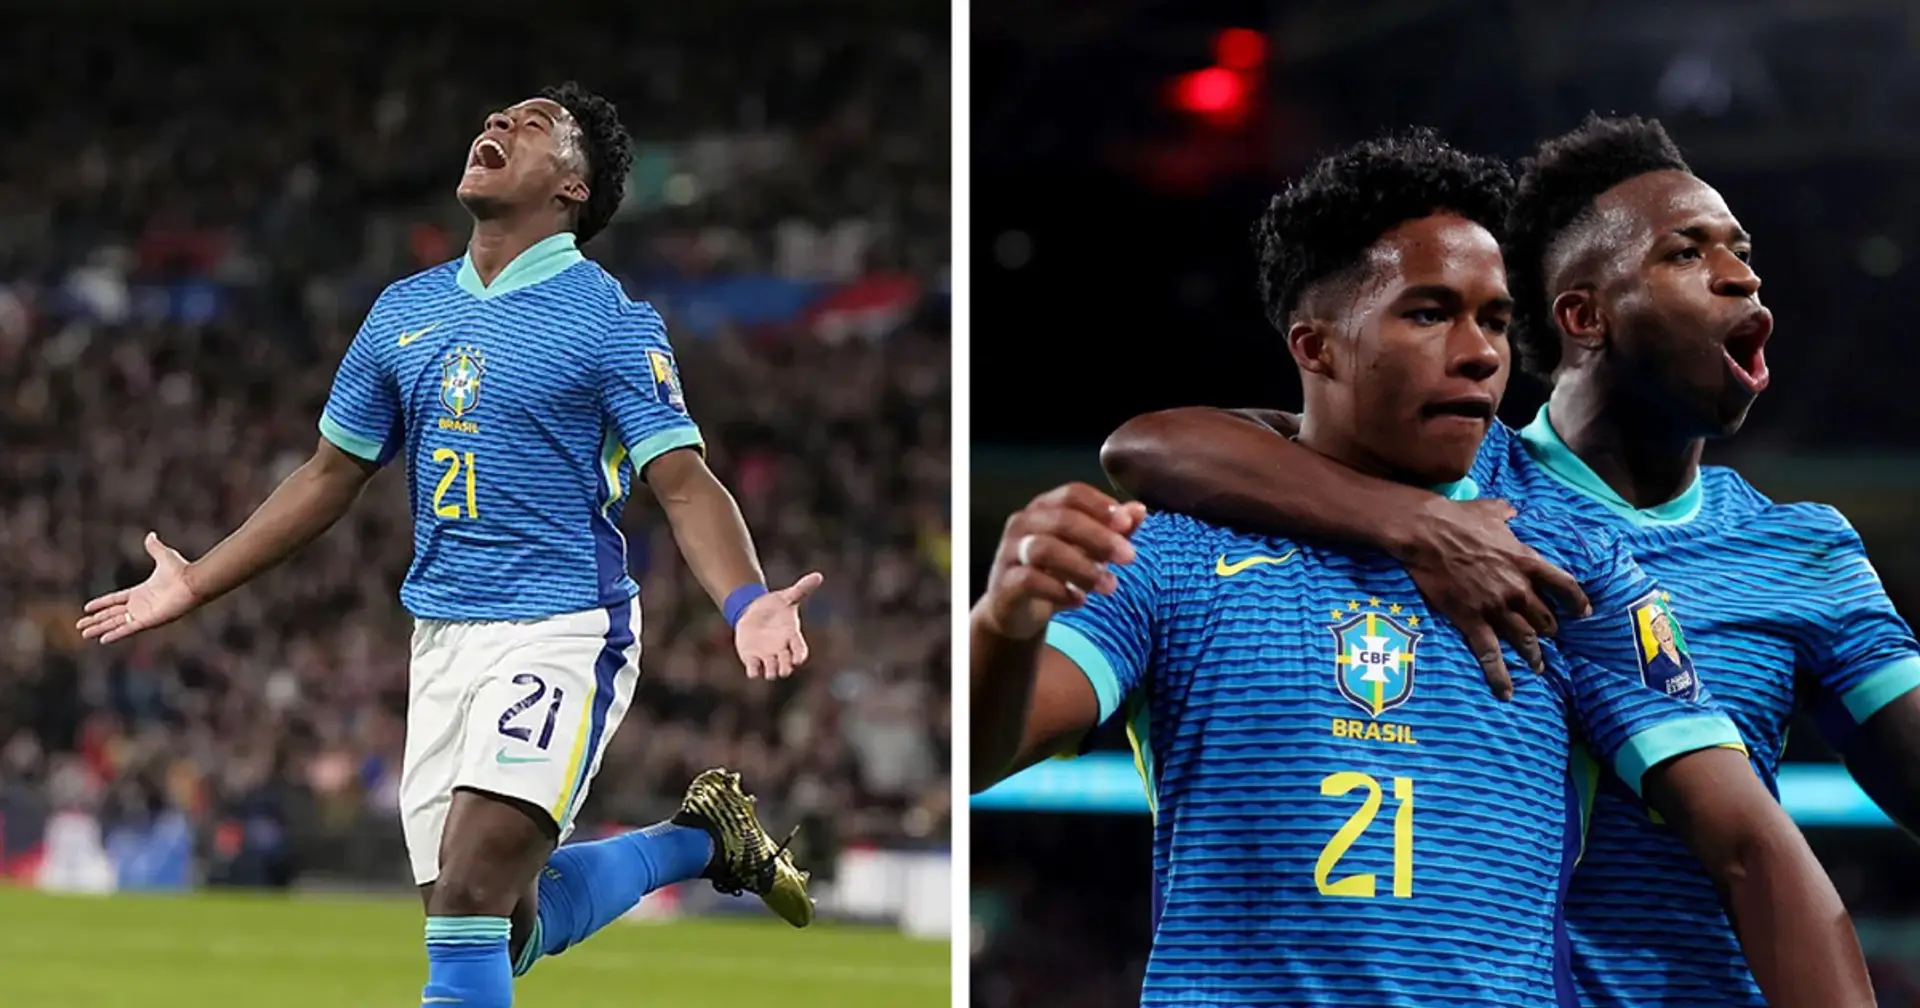 Real Madrid fans are in awe of the connection between Endrick and Vini - they can't wait to see them both in action in the club